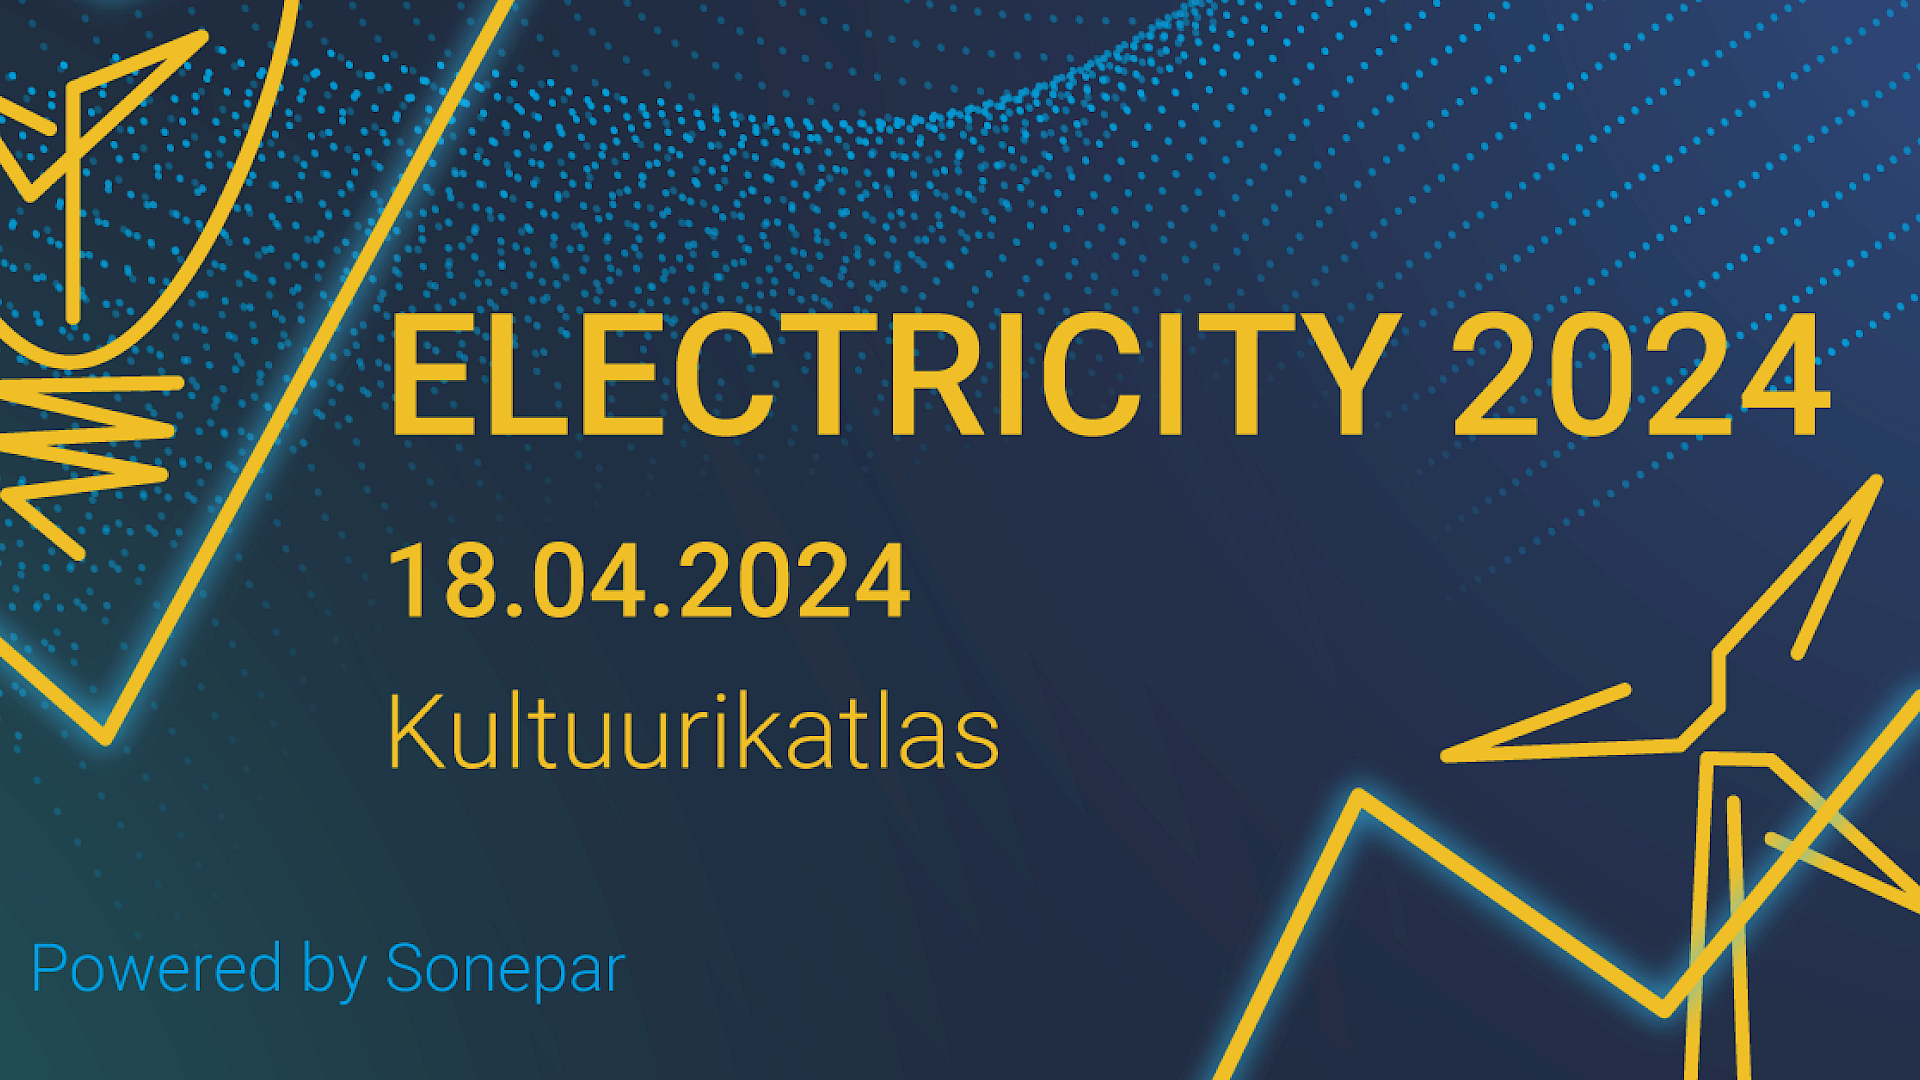 Electricity Expo 2024